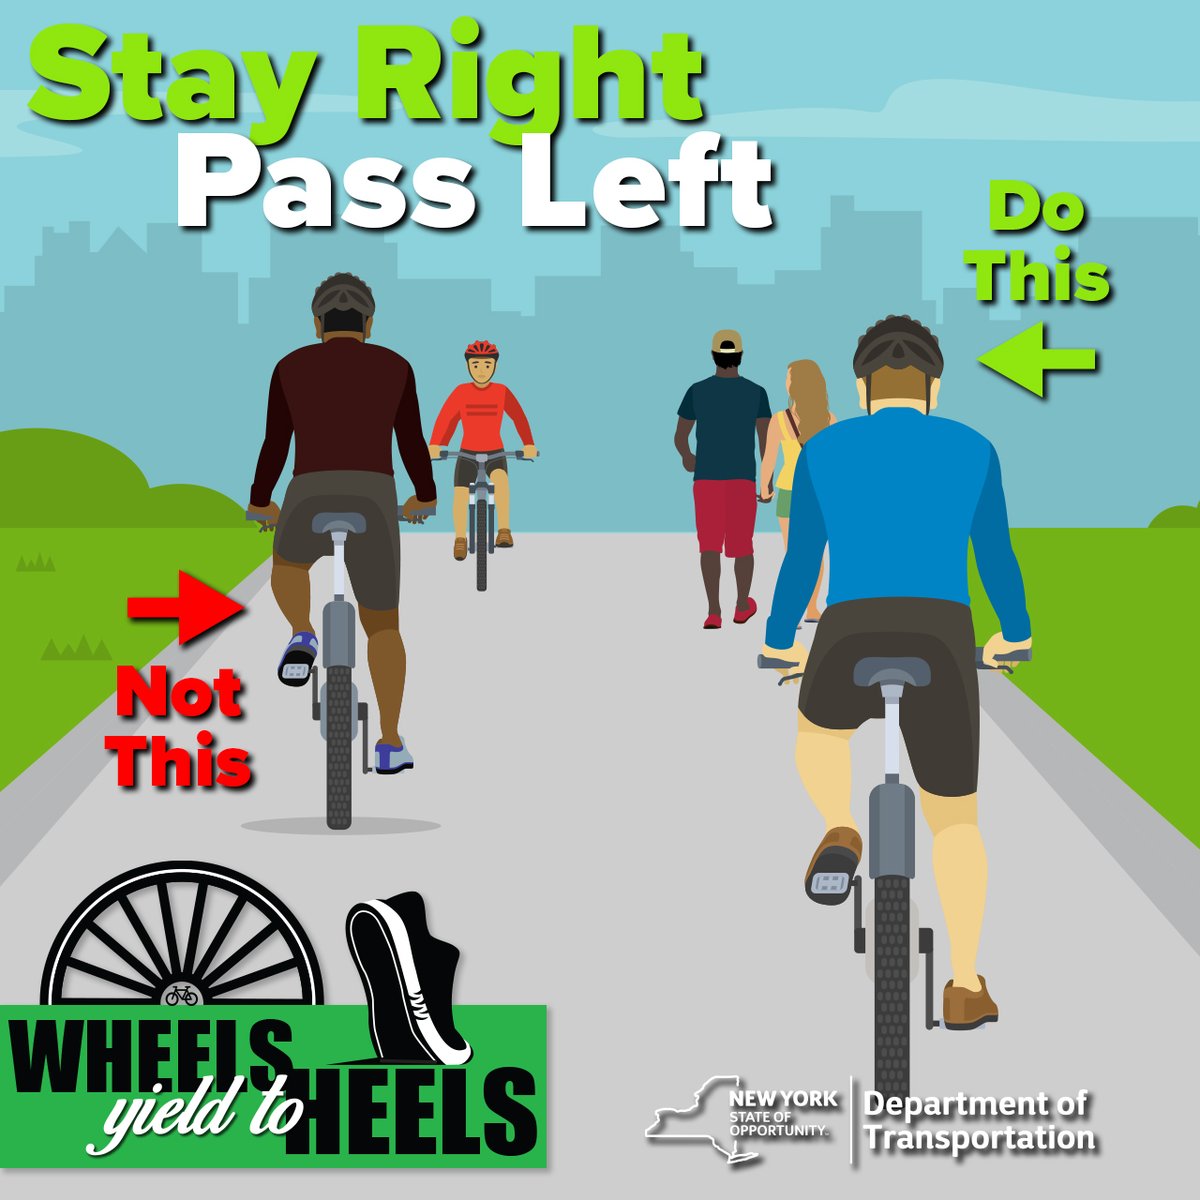 🚲 Keep it right! Remember wheels yield to heels - stick to the right side of the path and pass on the left. #KeepRight #ShareThePath